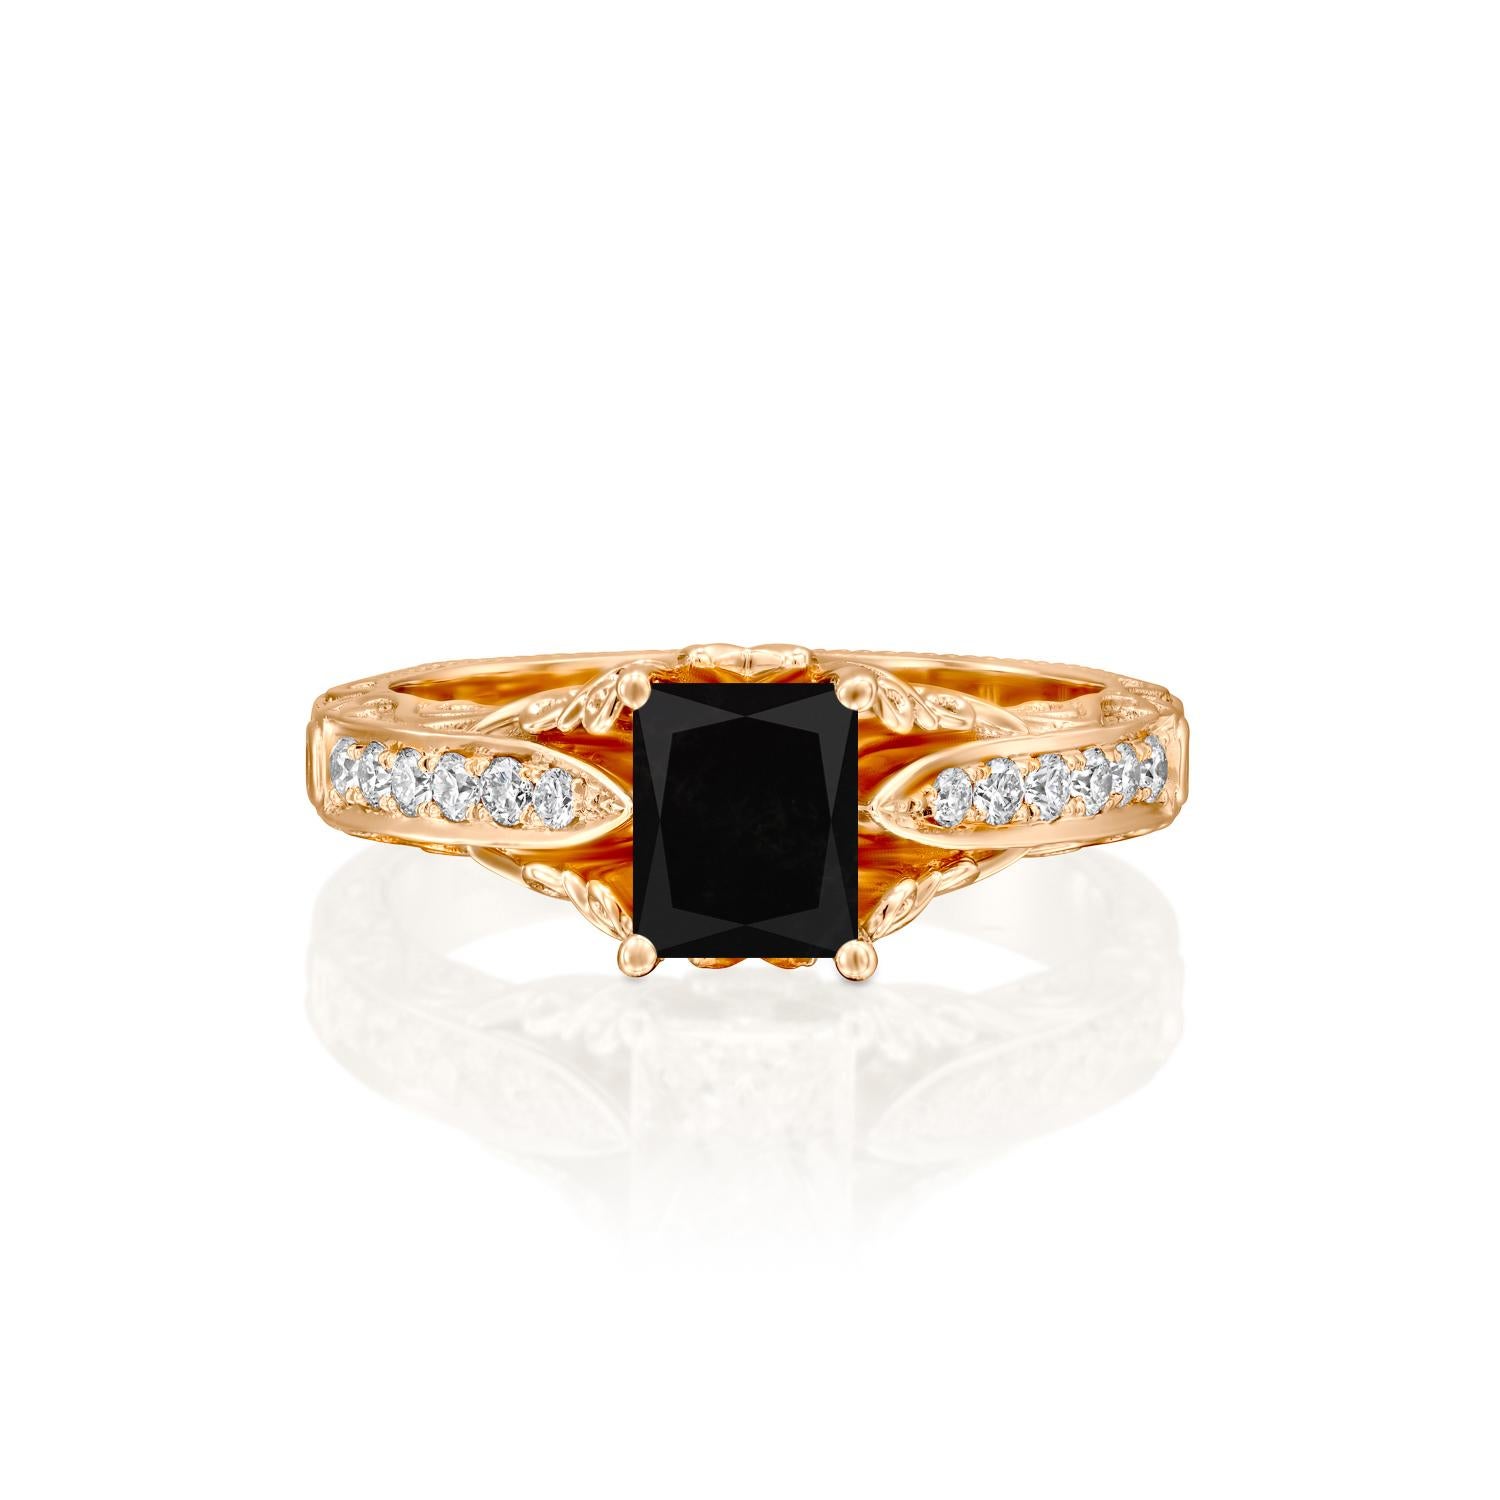 Beautiful solitaire with accents vintage style diamond engagement ring. Center stone is natural, radiant shaped, AAA quality Black Diamond of 1.5 carat and it is surrounded by smaller natural diamonds approx. 0.25 total carat weight. The total carat